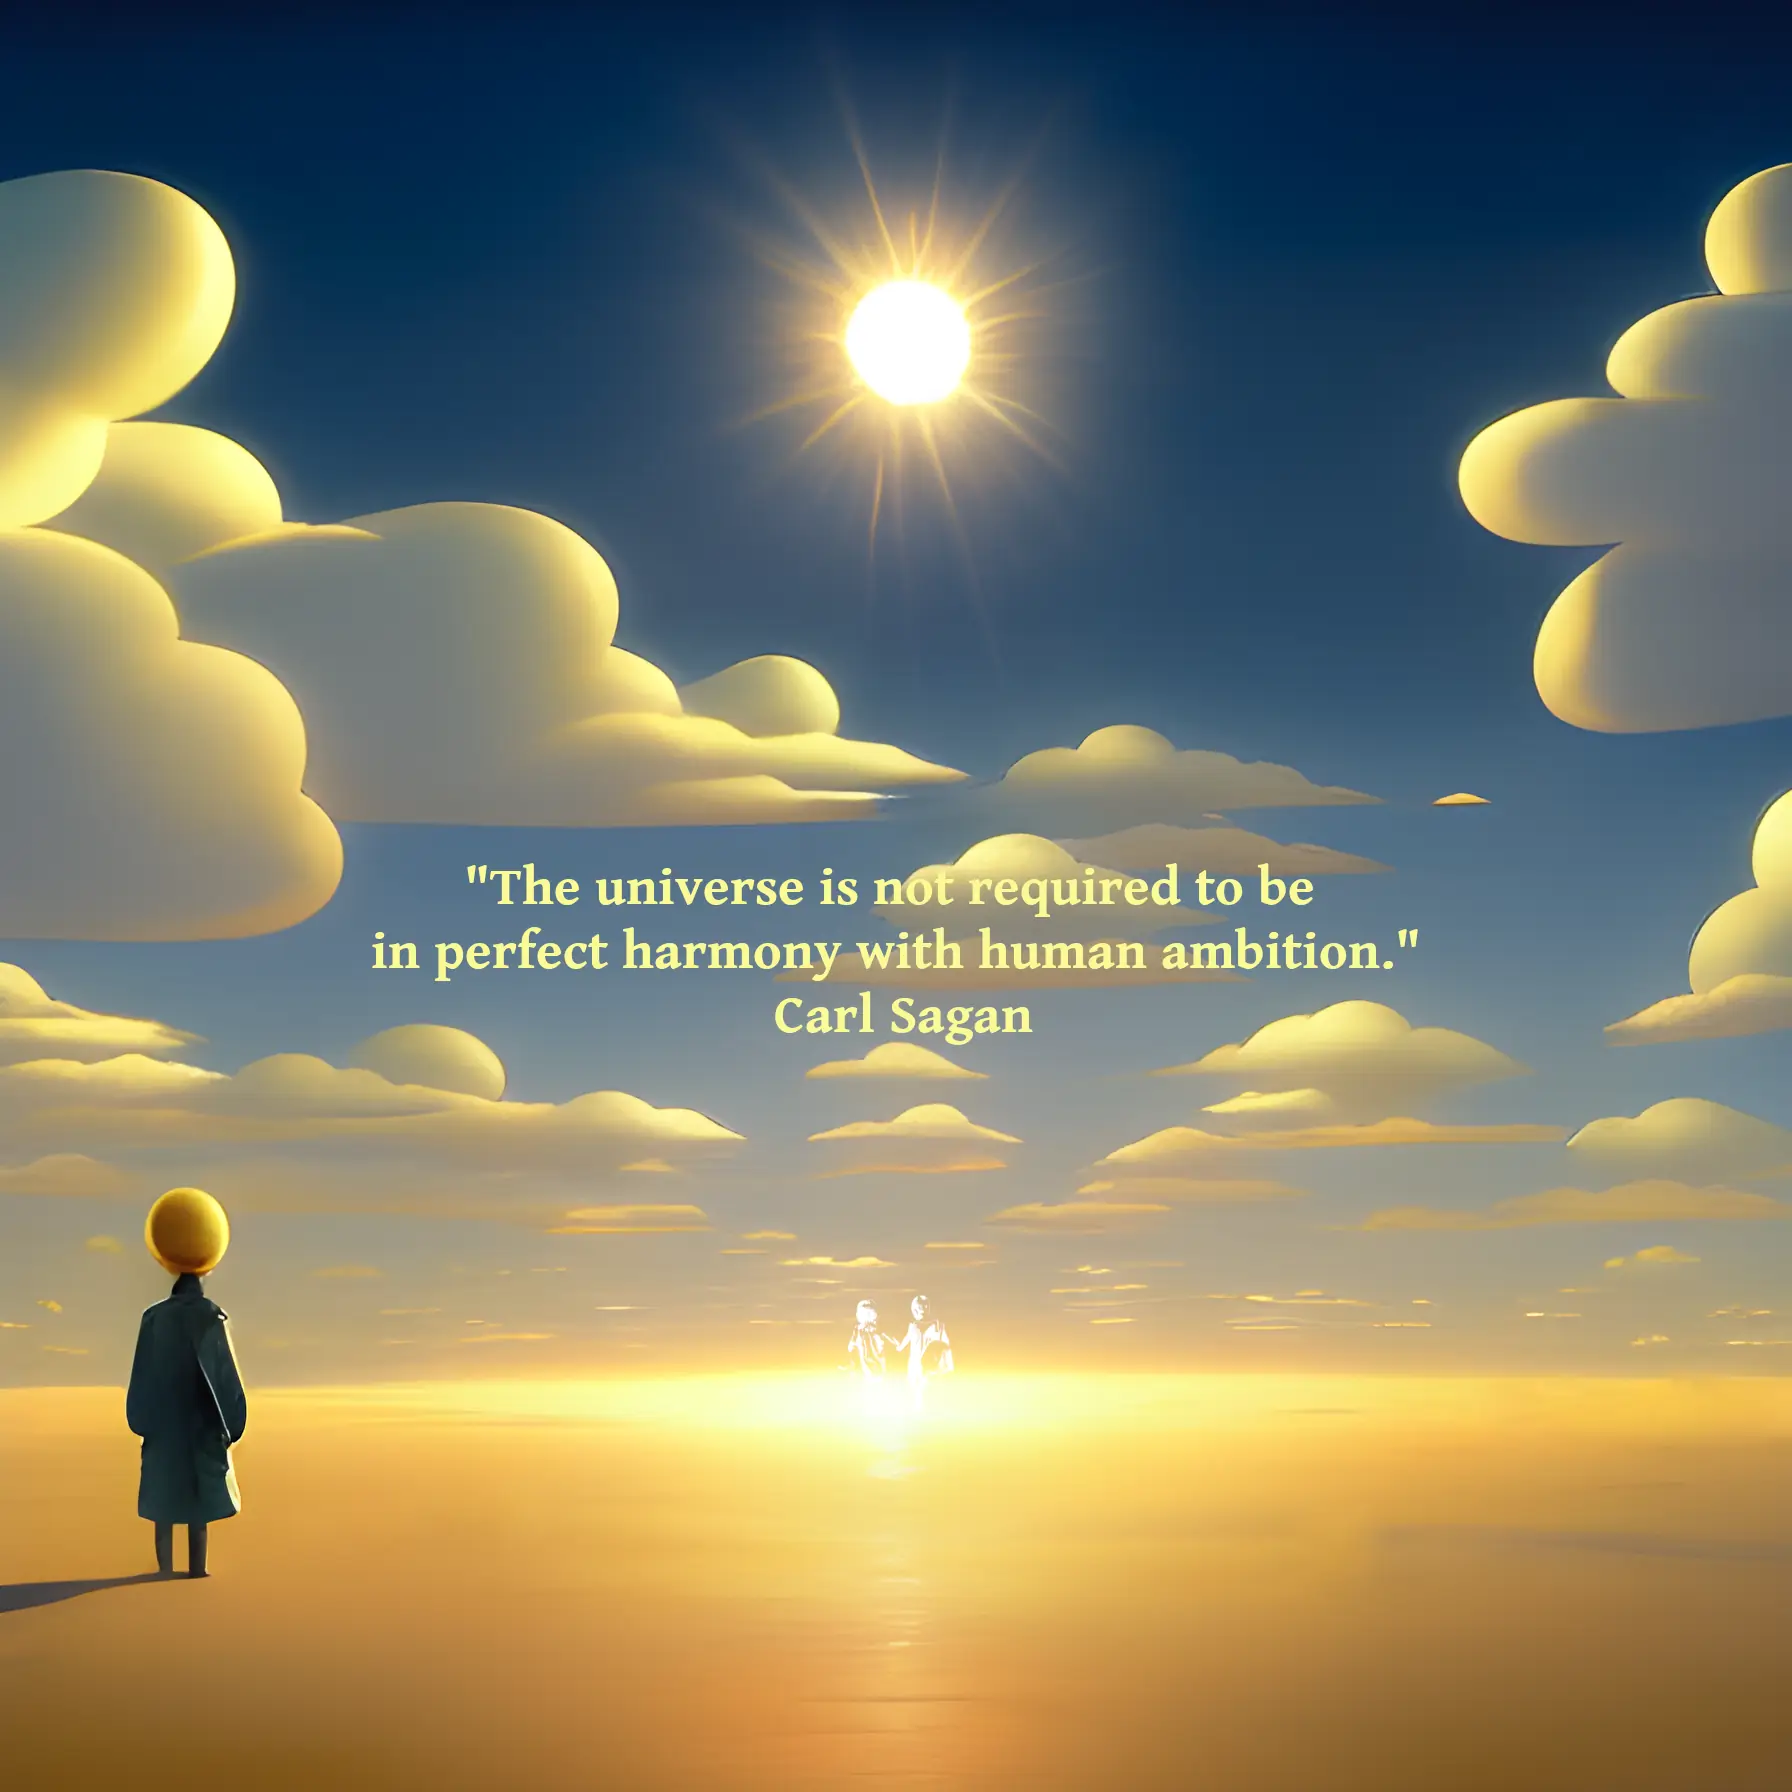 A figure is in the bottom left of the image standing on desert-like ground facing towards a beautiful bright sun. The sun shines on the horizon, which is near the bottom of the image. The sky is blue and full of clouds. A quote reads: "The universe is not required to be in perfect harmony with human ambition."